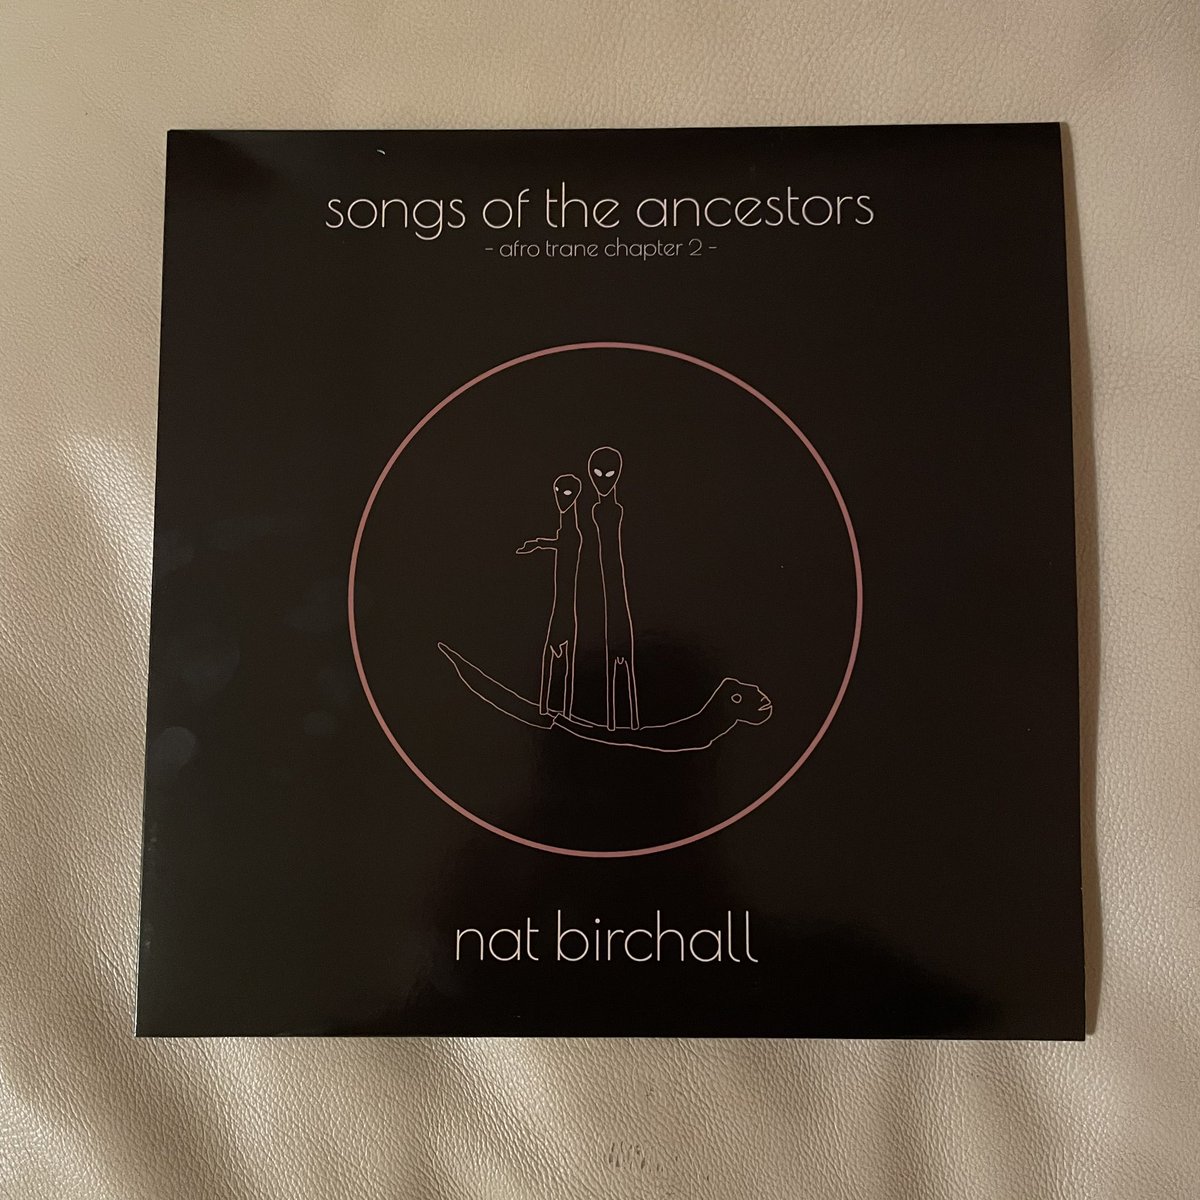 #NowPlaying Nat Birchall - Songs Of The Ancestors - Afro Trane chapter 2 - (Ancient Archive Of Sound, 2023). An impressive album that sounds like it was made by a cohesive jazz group whereas it is a solo record where Nat Birchall plays all the instruments. Awesome! 🖤